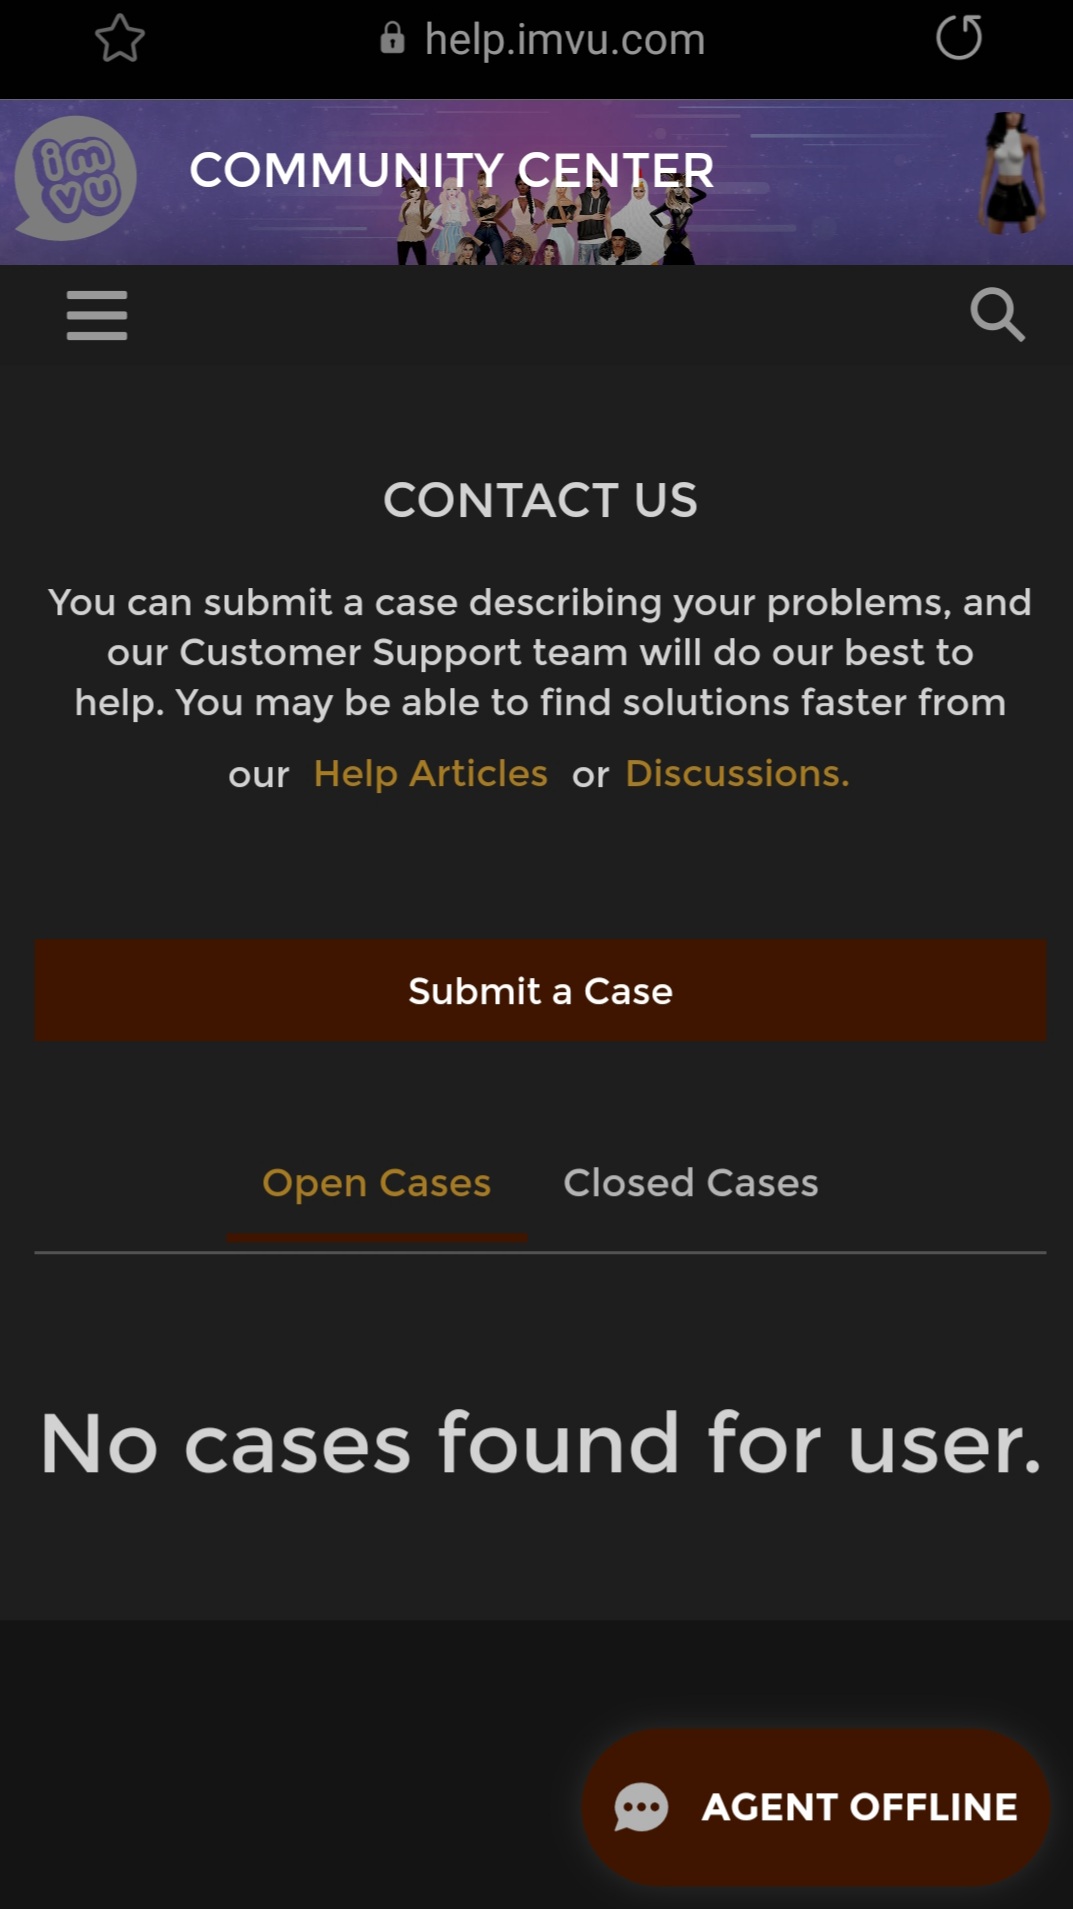 File for a case by clicking on submit a case